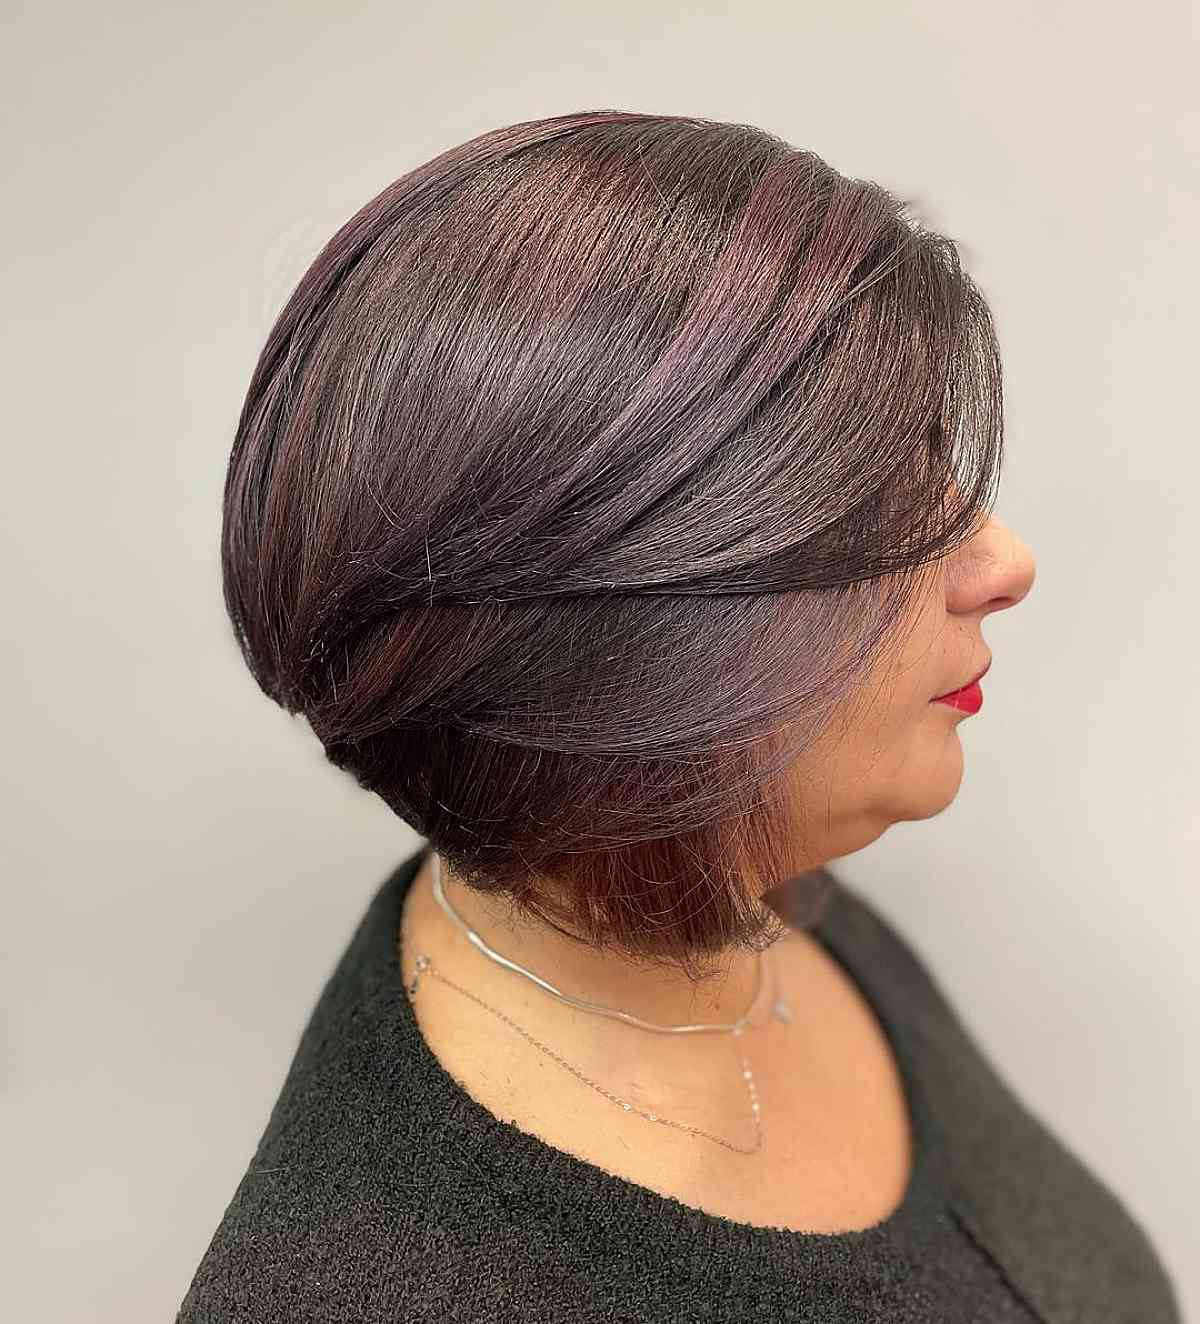 Top 10 Winter Hair Colors for Women In Their 60s (2022 Season)